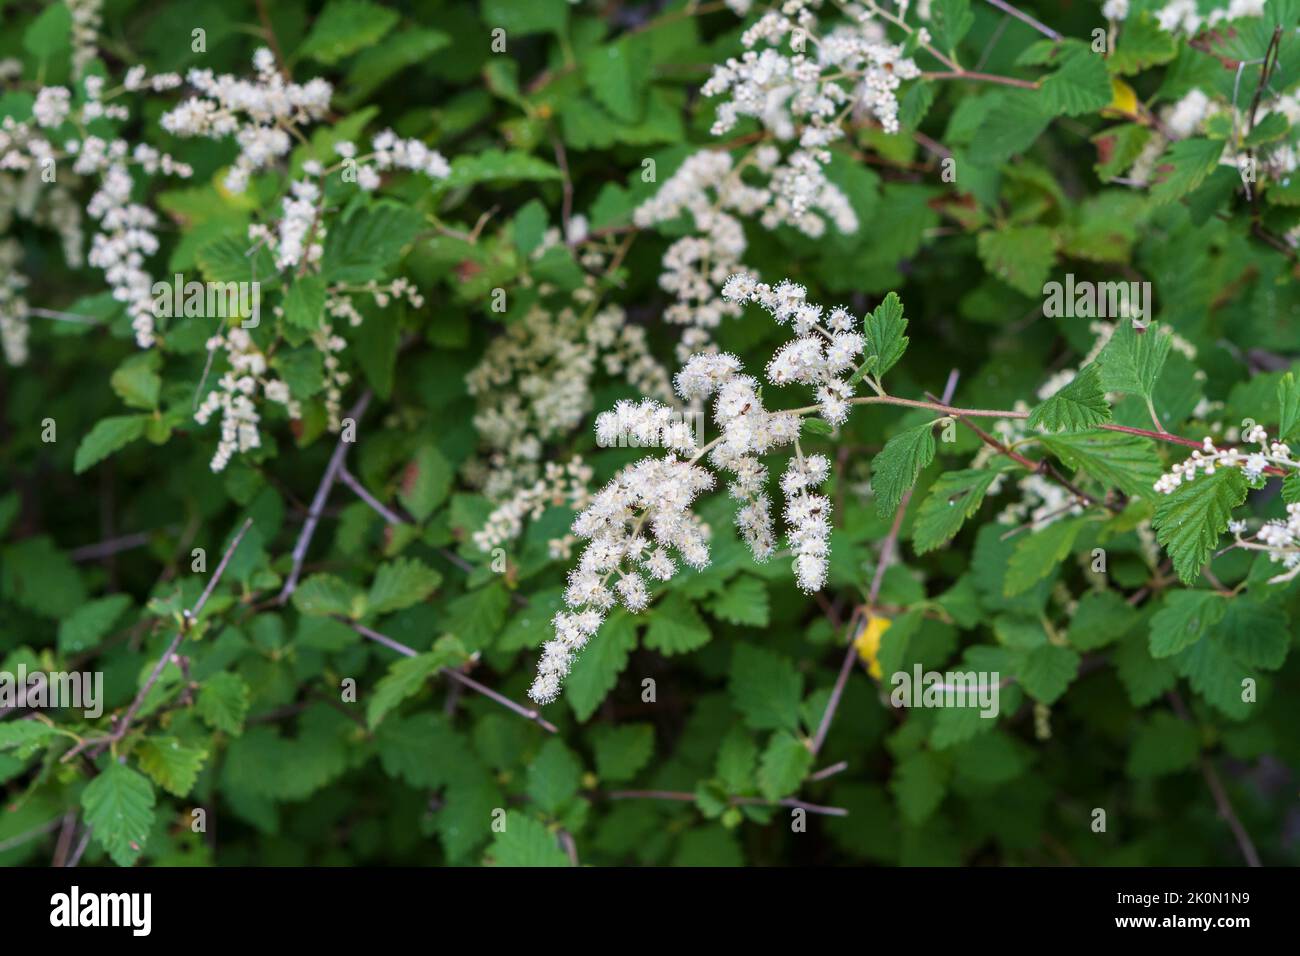 A closeup image of white flower clusters of the Ocean Spray plant (Holodiscus discolor), a native deciduous shrub growing in a Pacific NW forest. Stock Photo